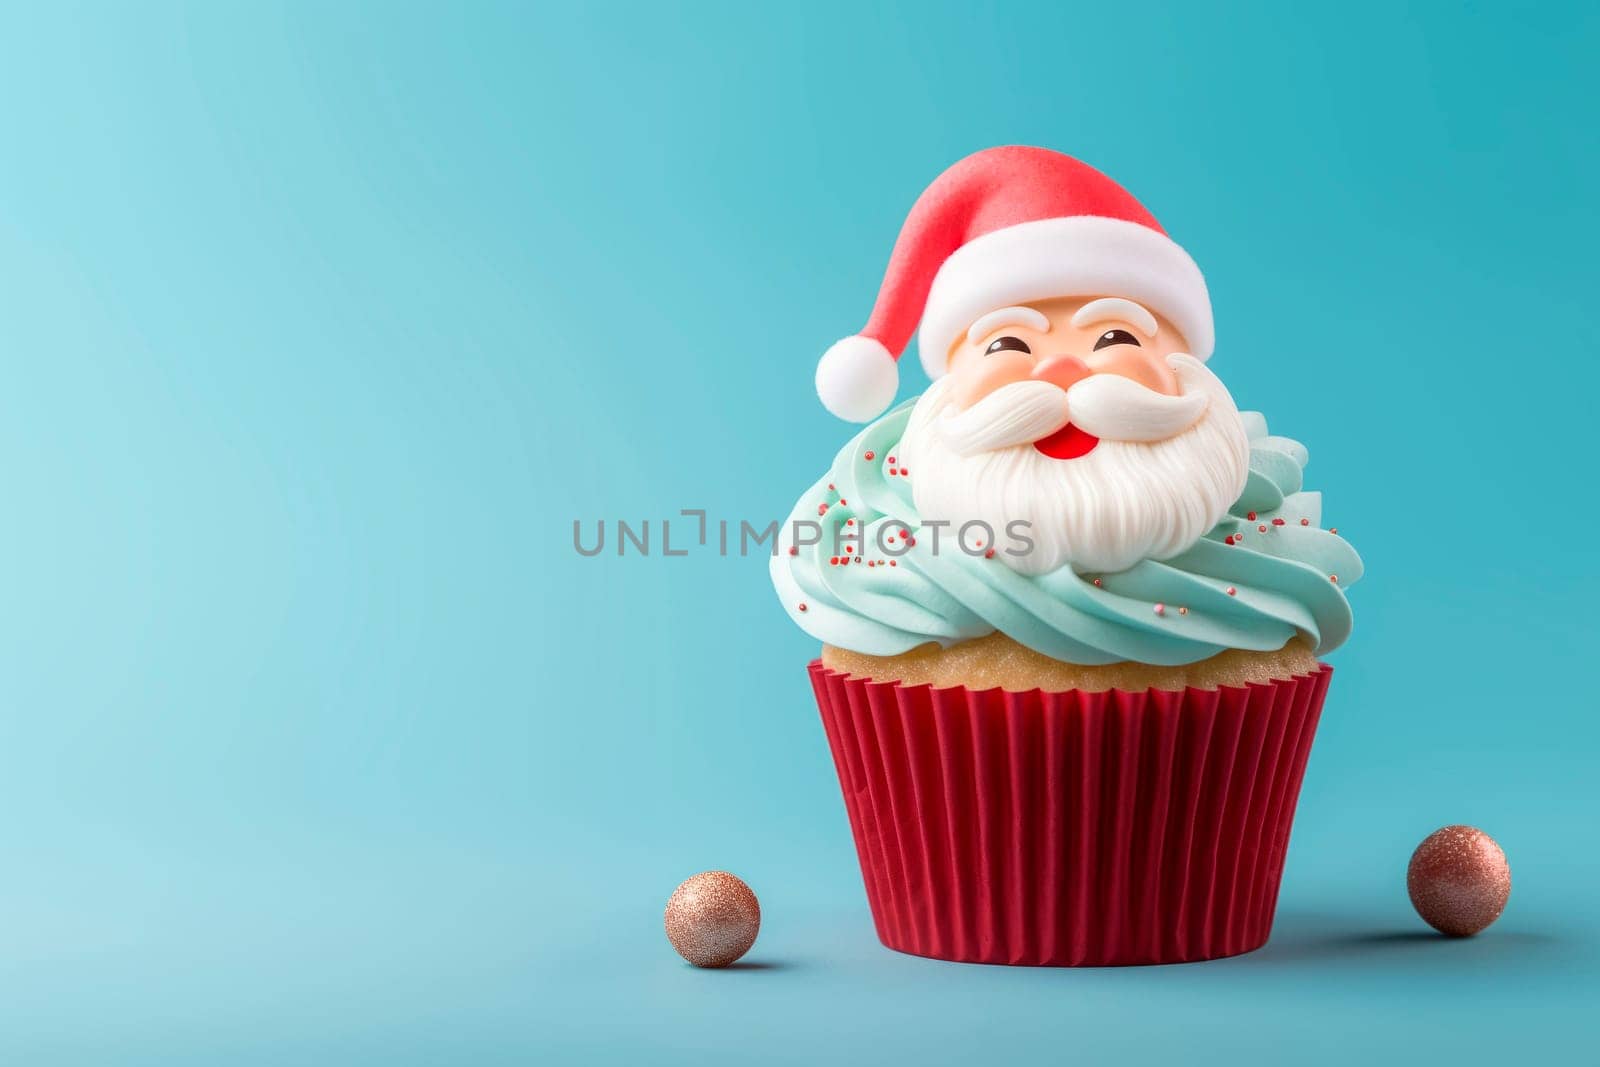 Unusual Christmas desserts. The concept of Christmas decor. New Year's pastries.